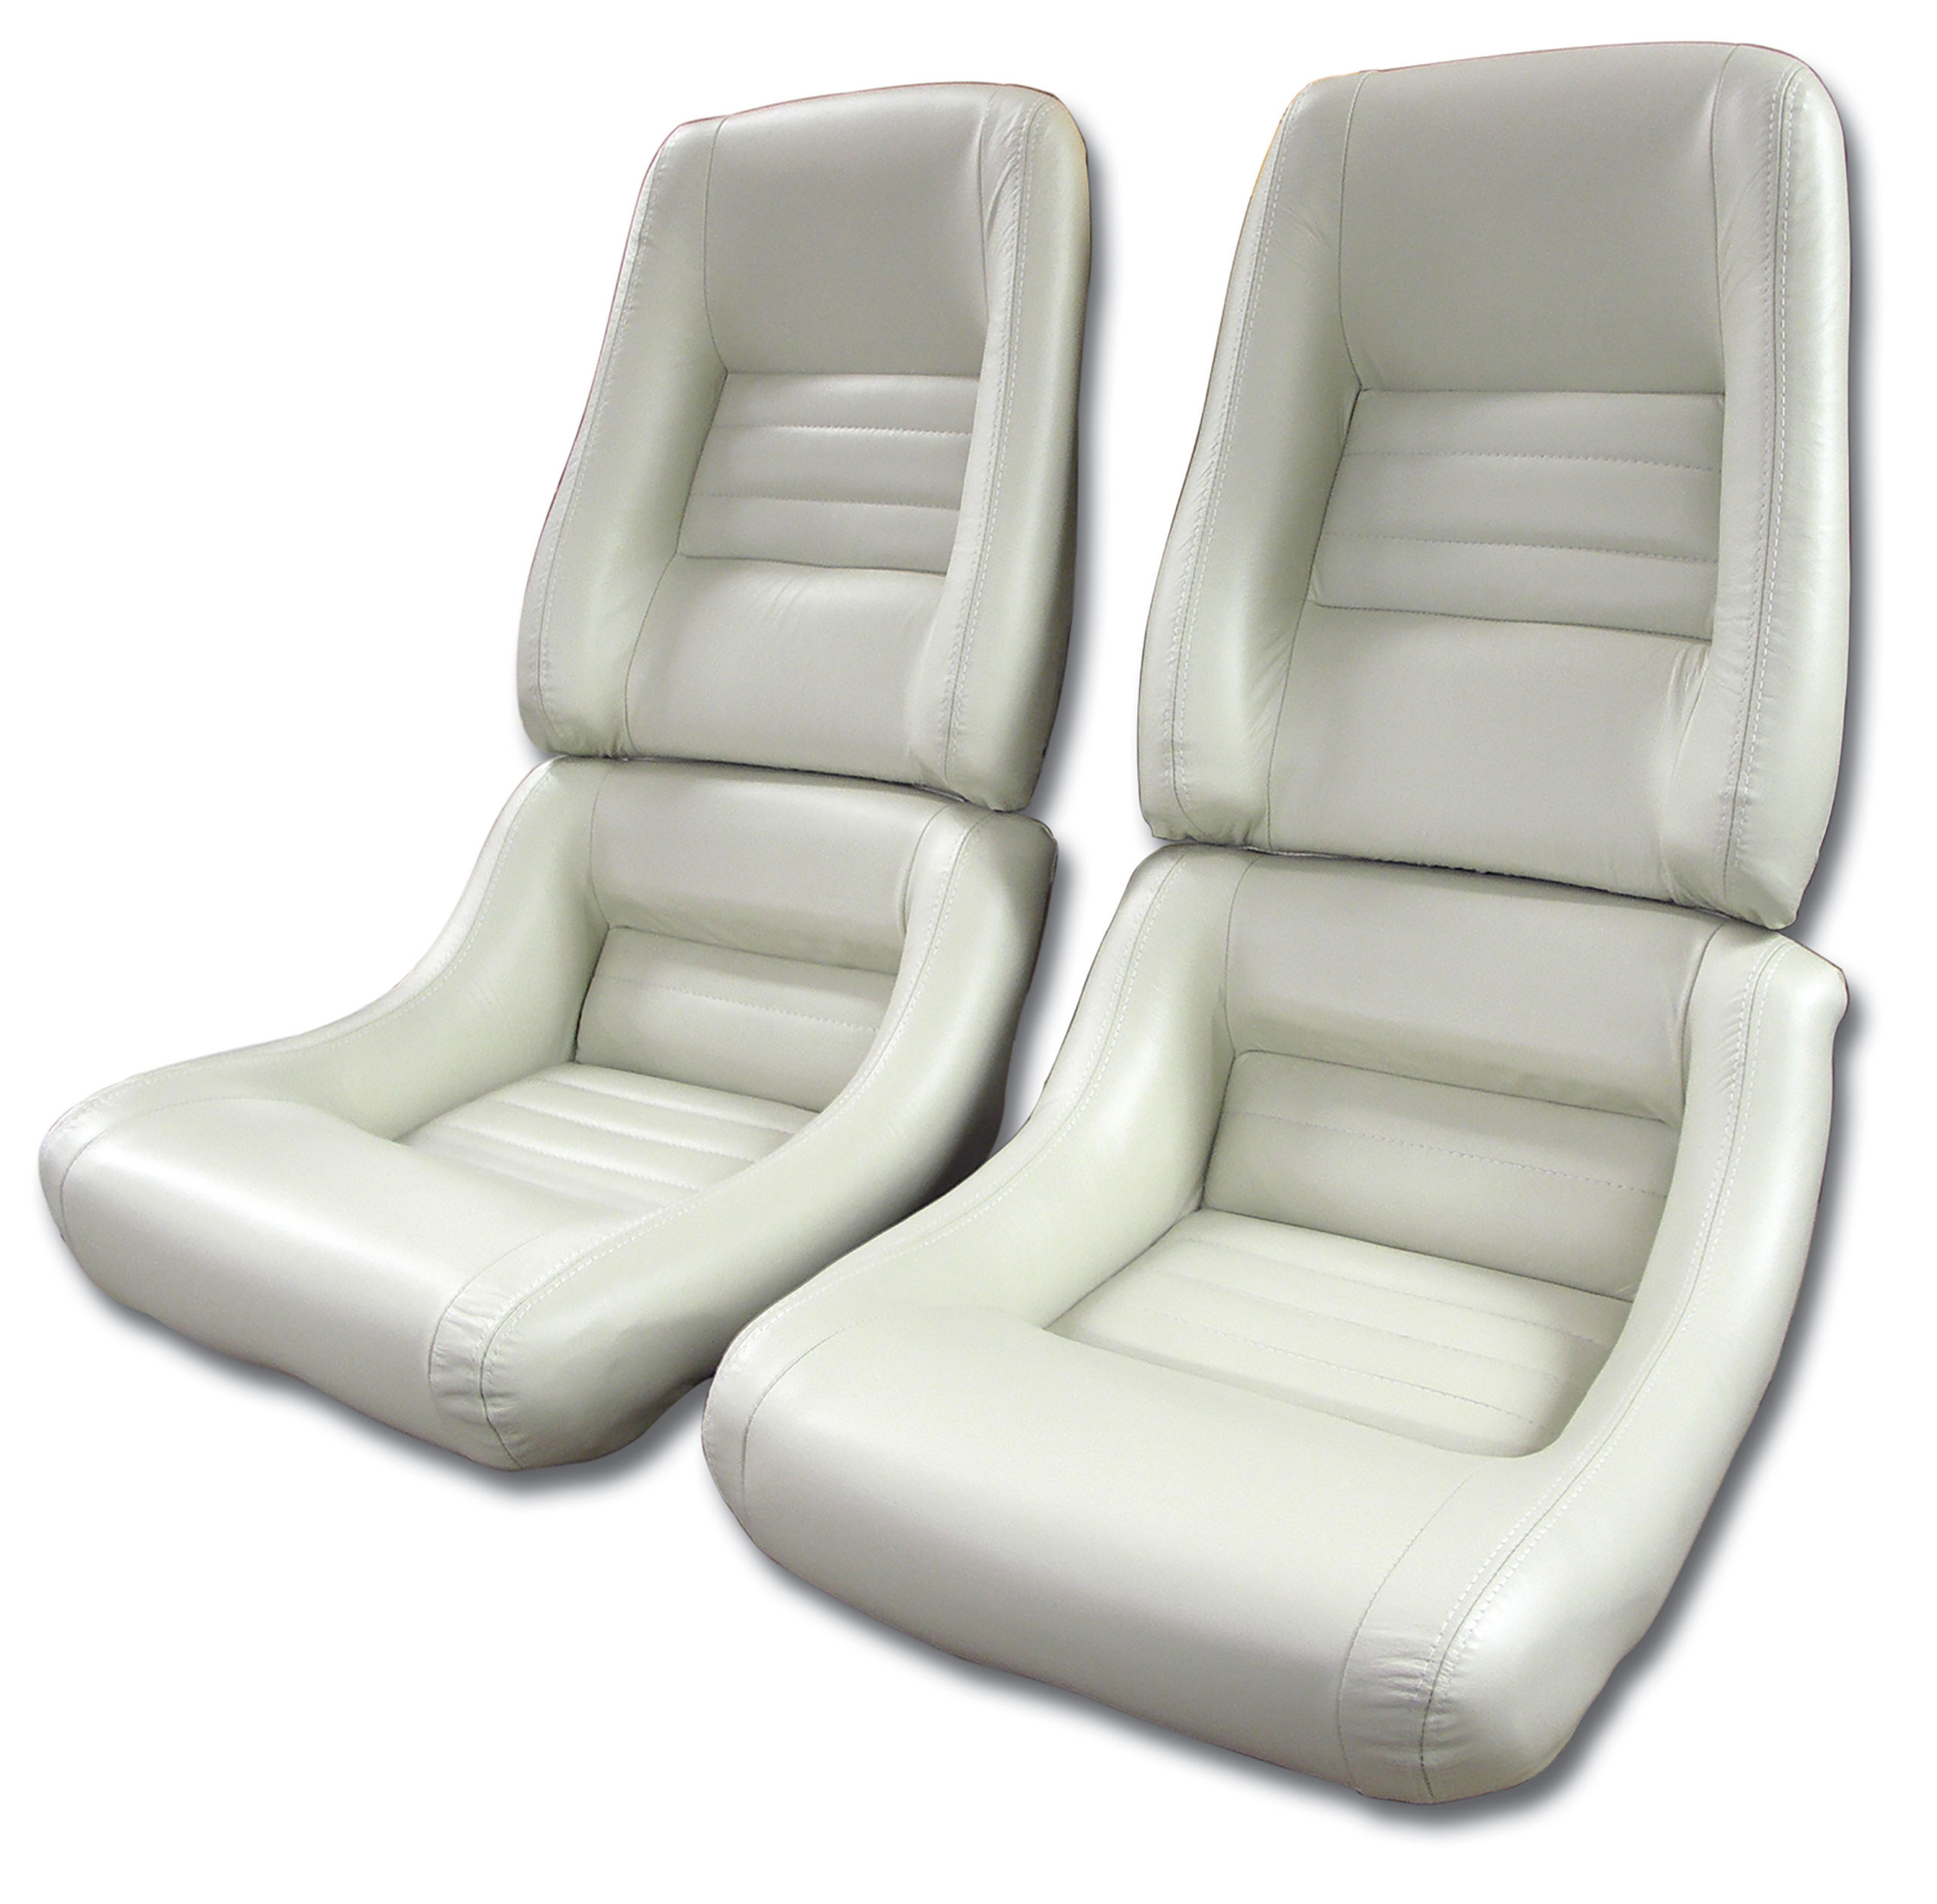 79-80 Corvette C3 Leather Seat Covers Oyster Leather/Vinyl Original 2" Bolster CA-420166 